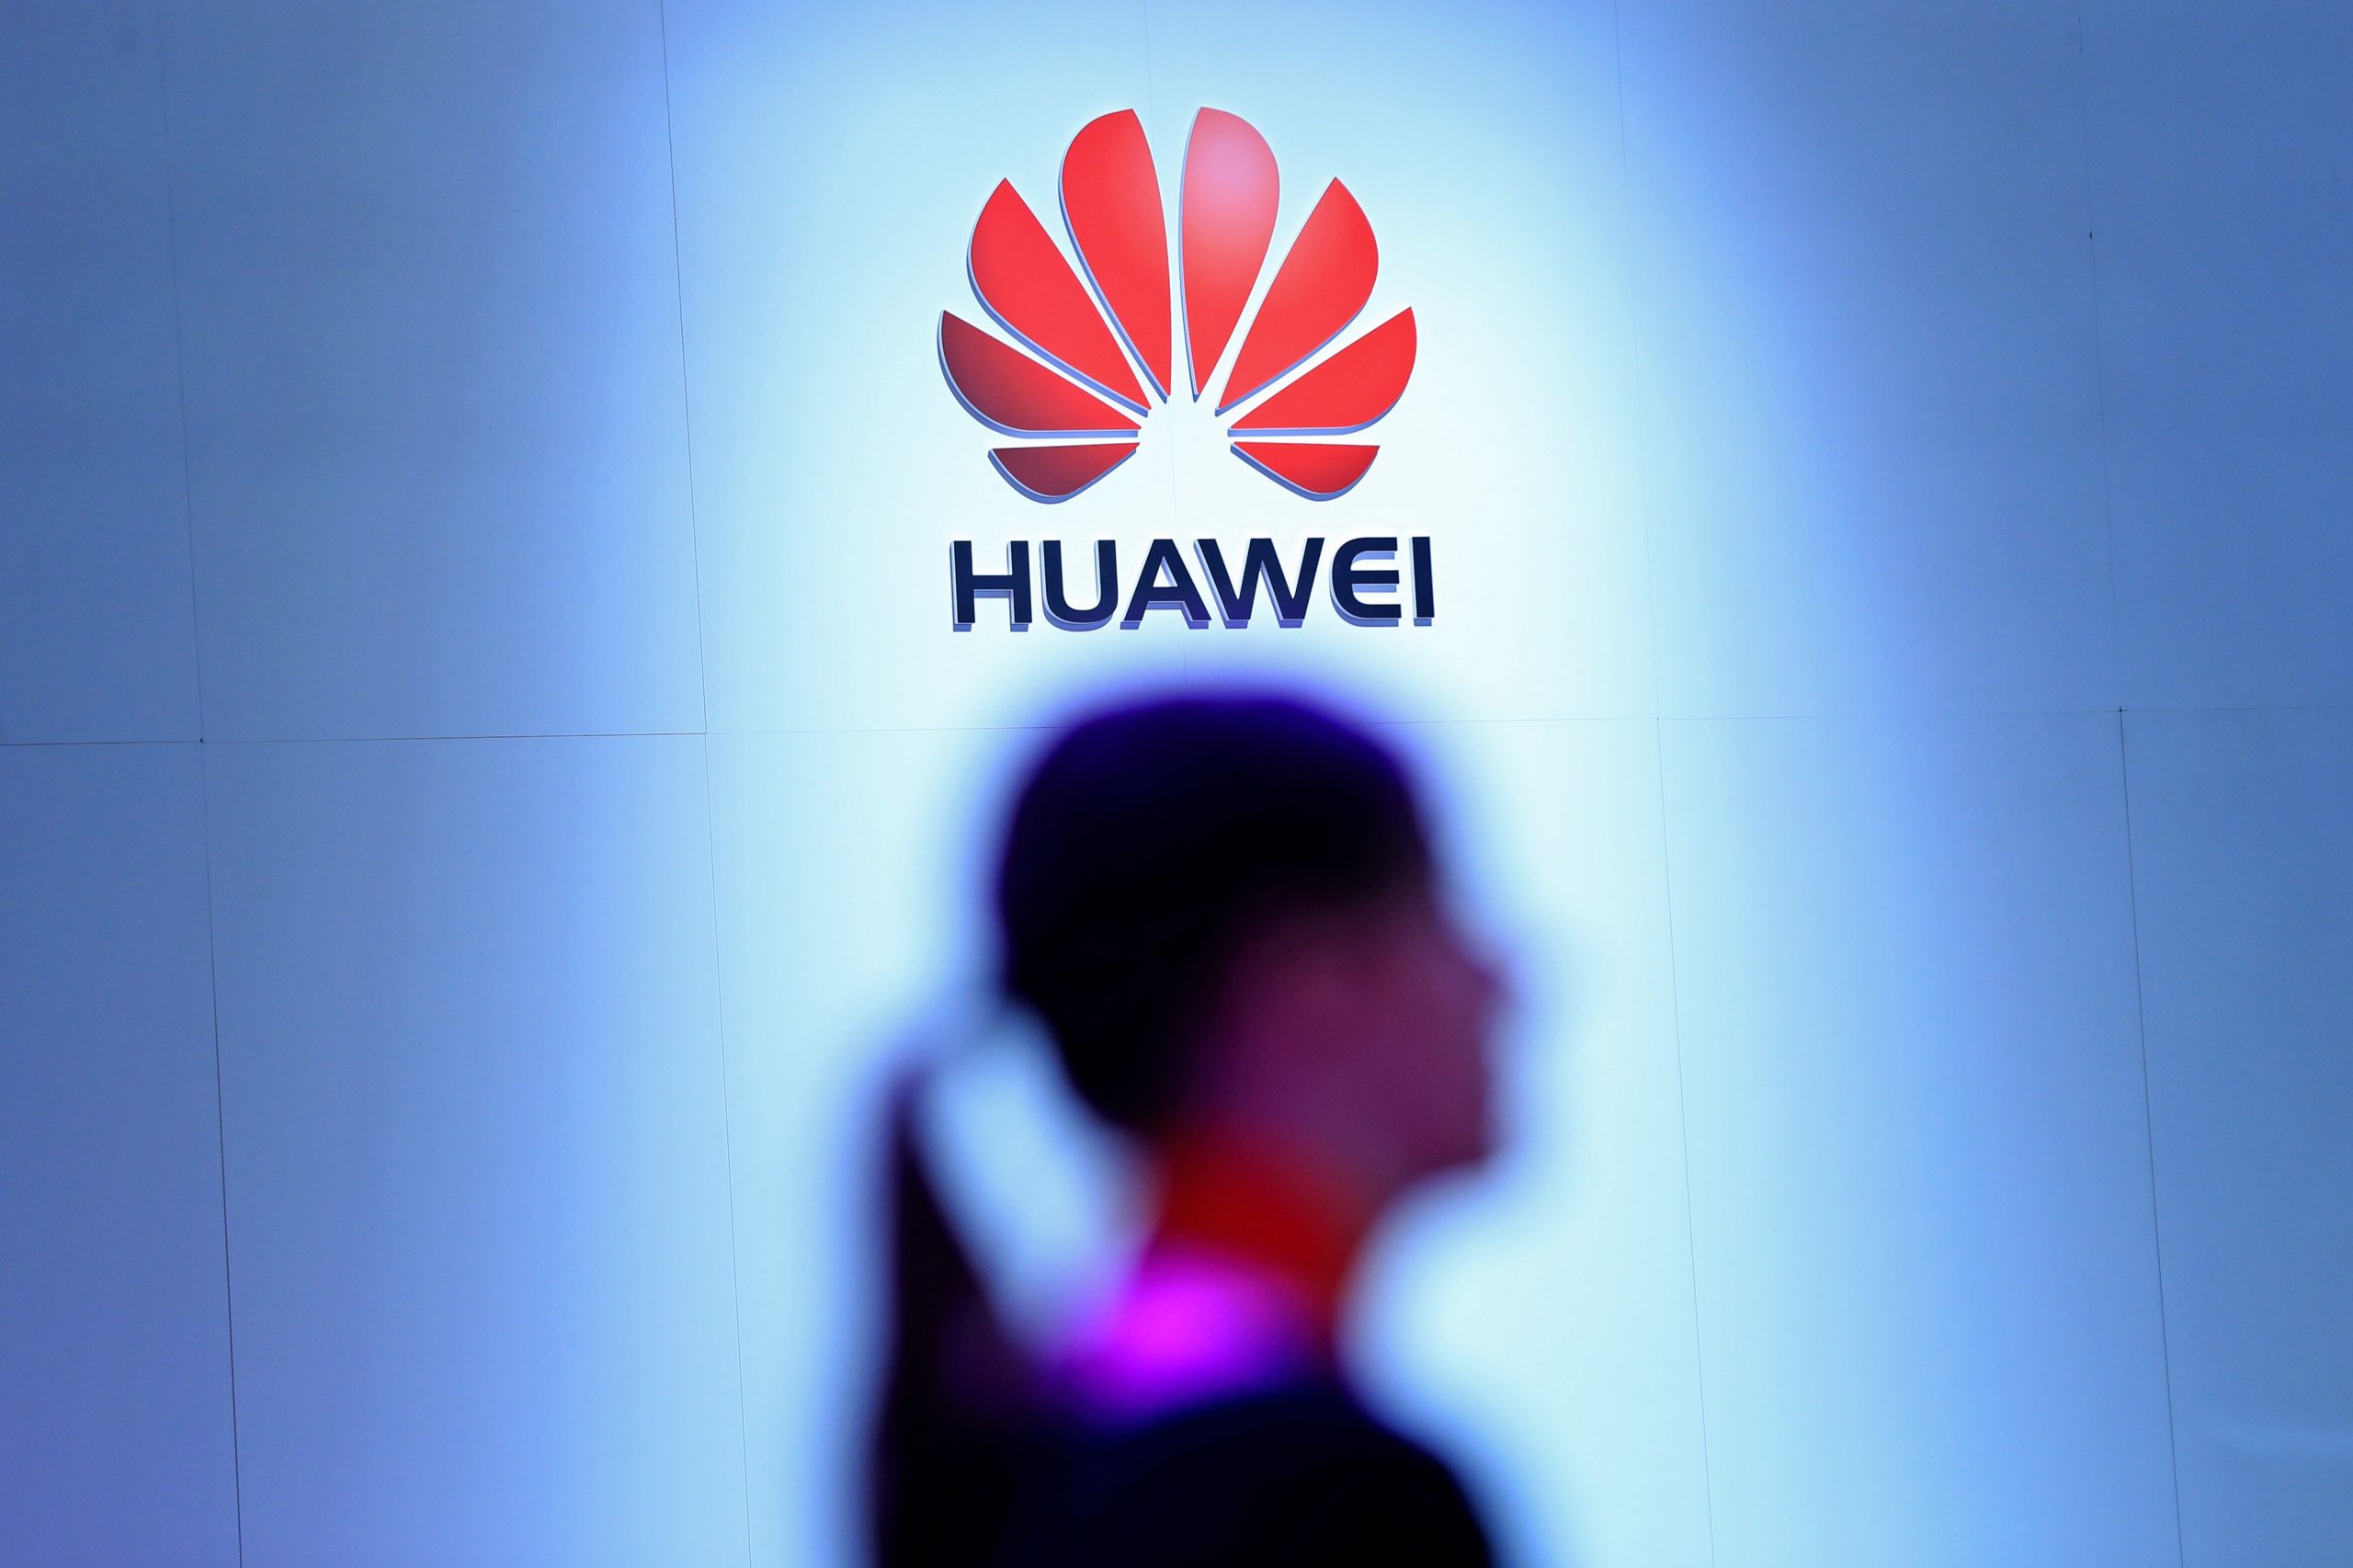 Huawei to be excluded from Germany’s 5G rollout: Report